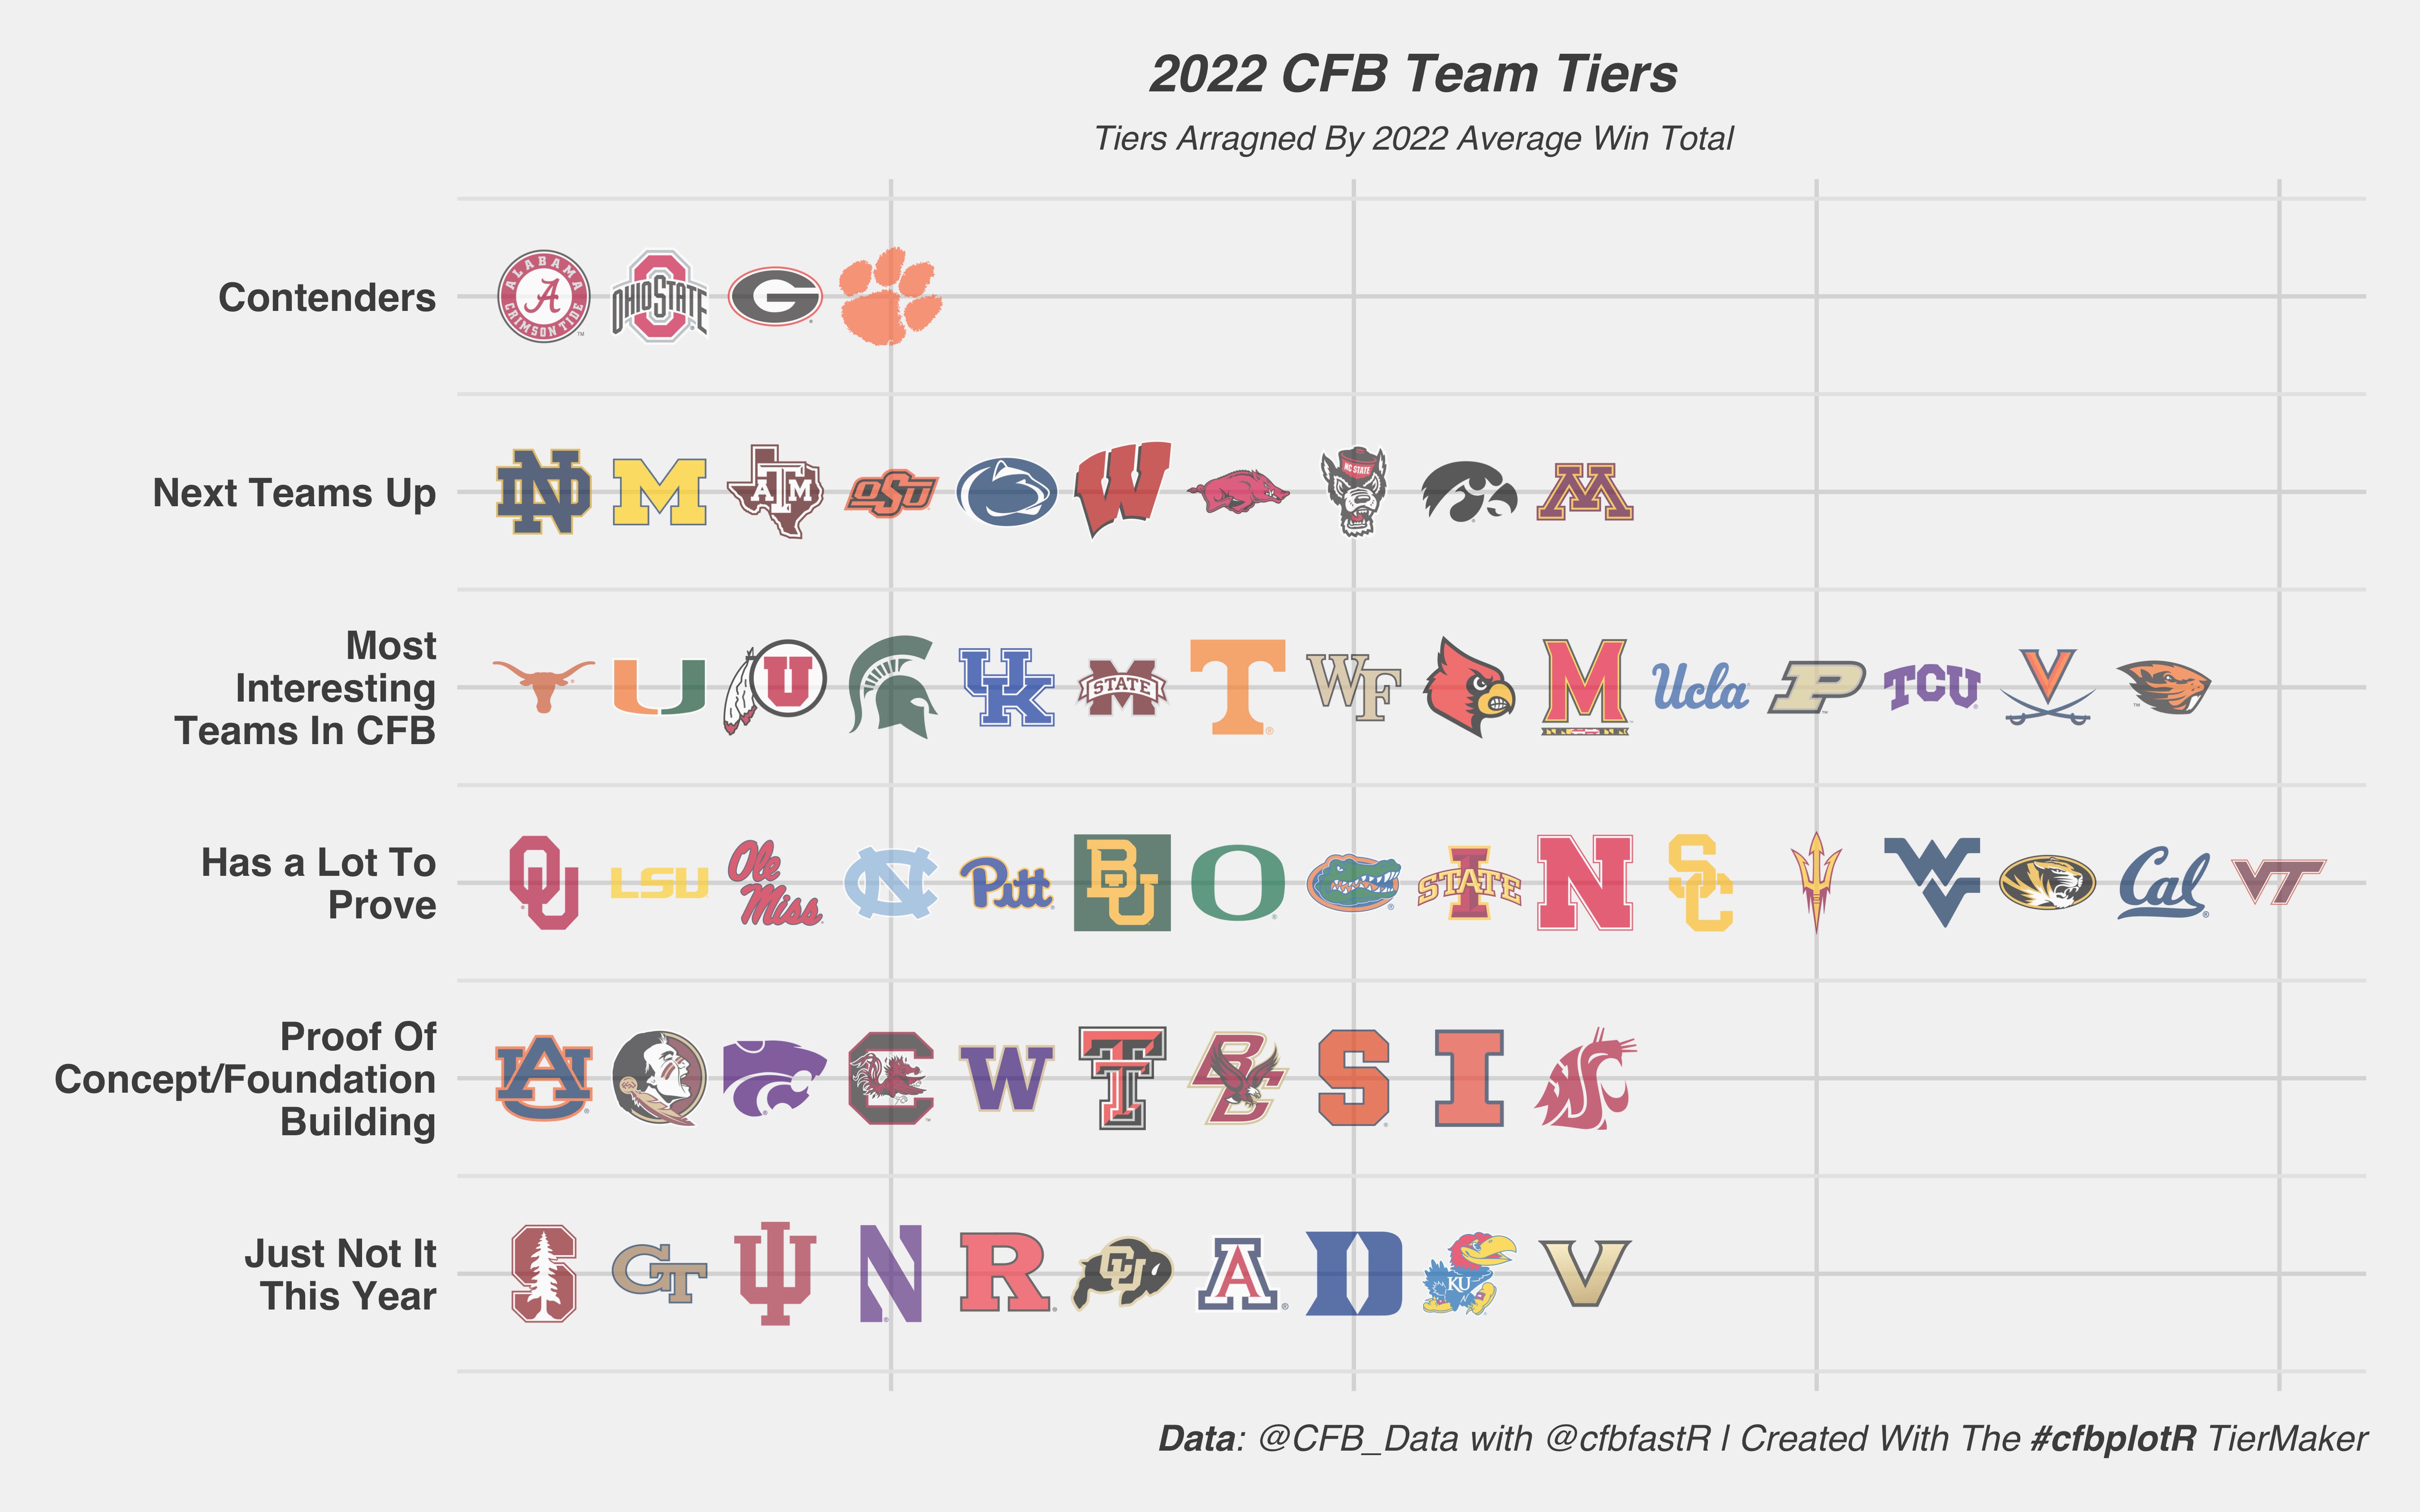 Strength of schedule for 2022 playoff contenders